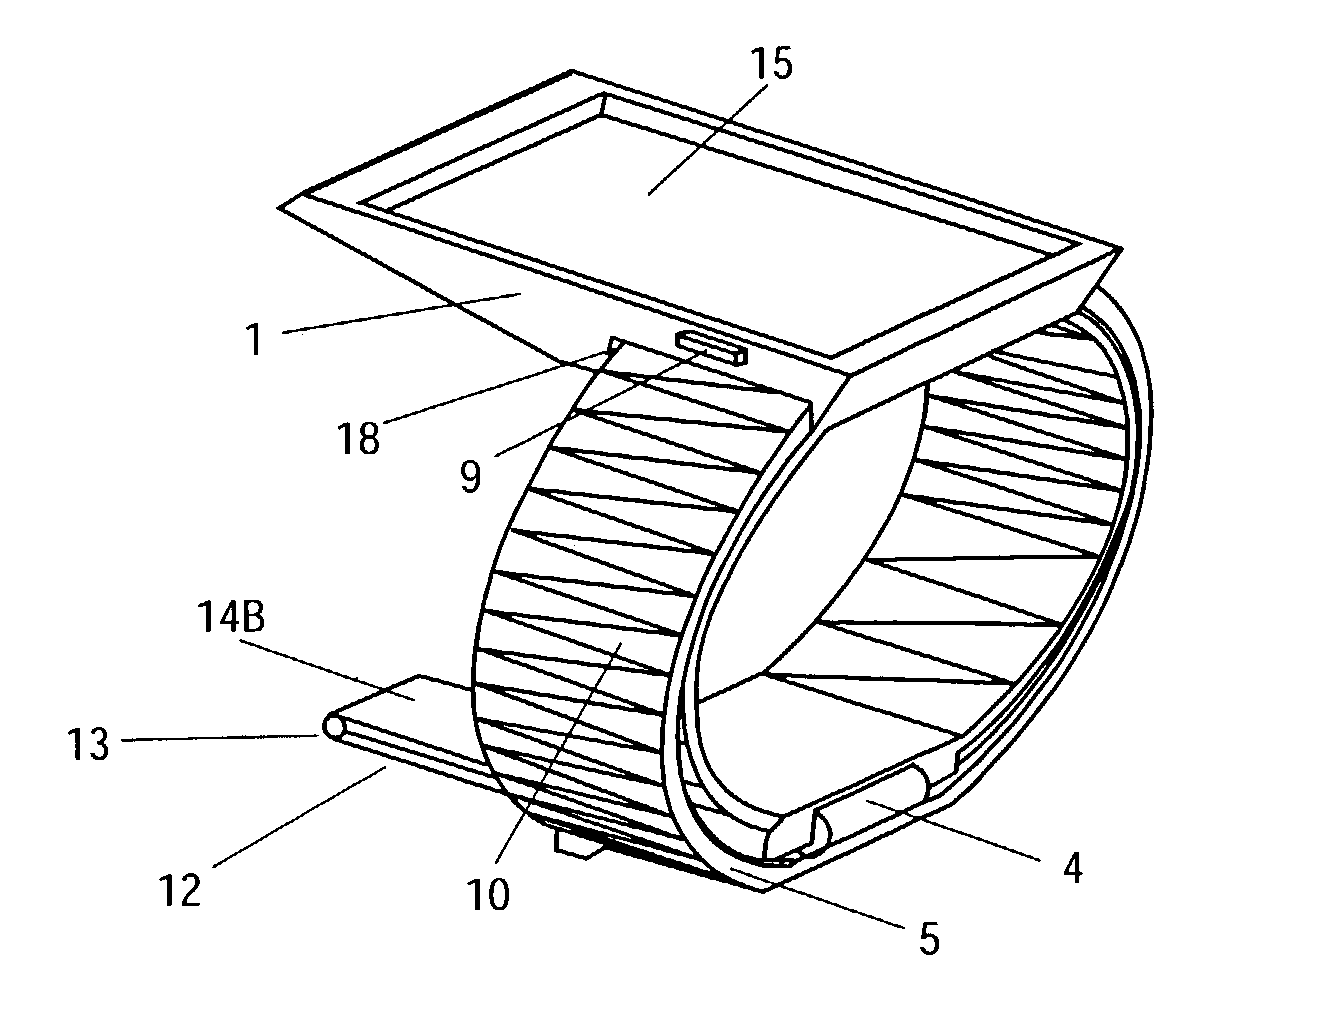 Wearable computing, input, and display device